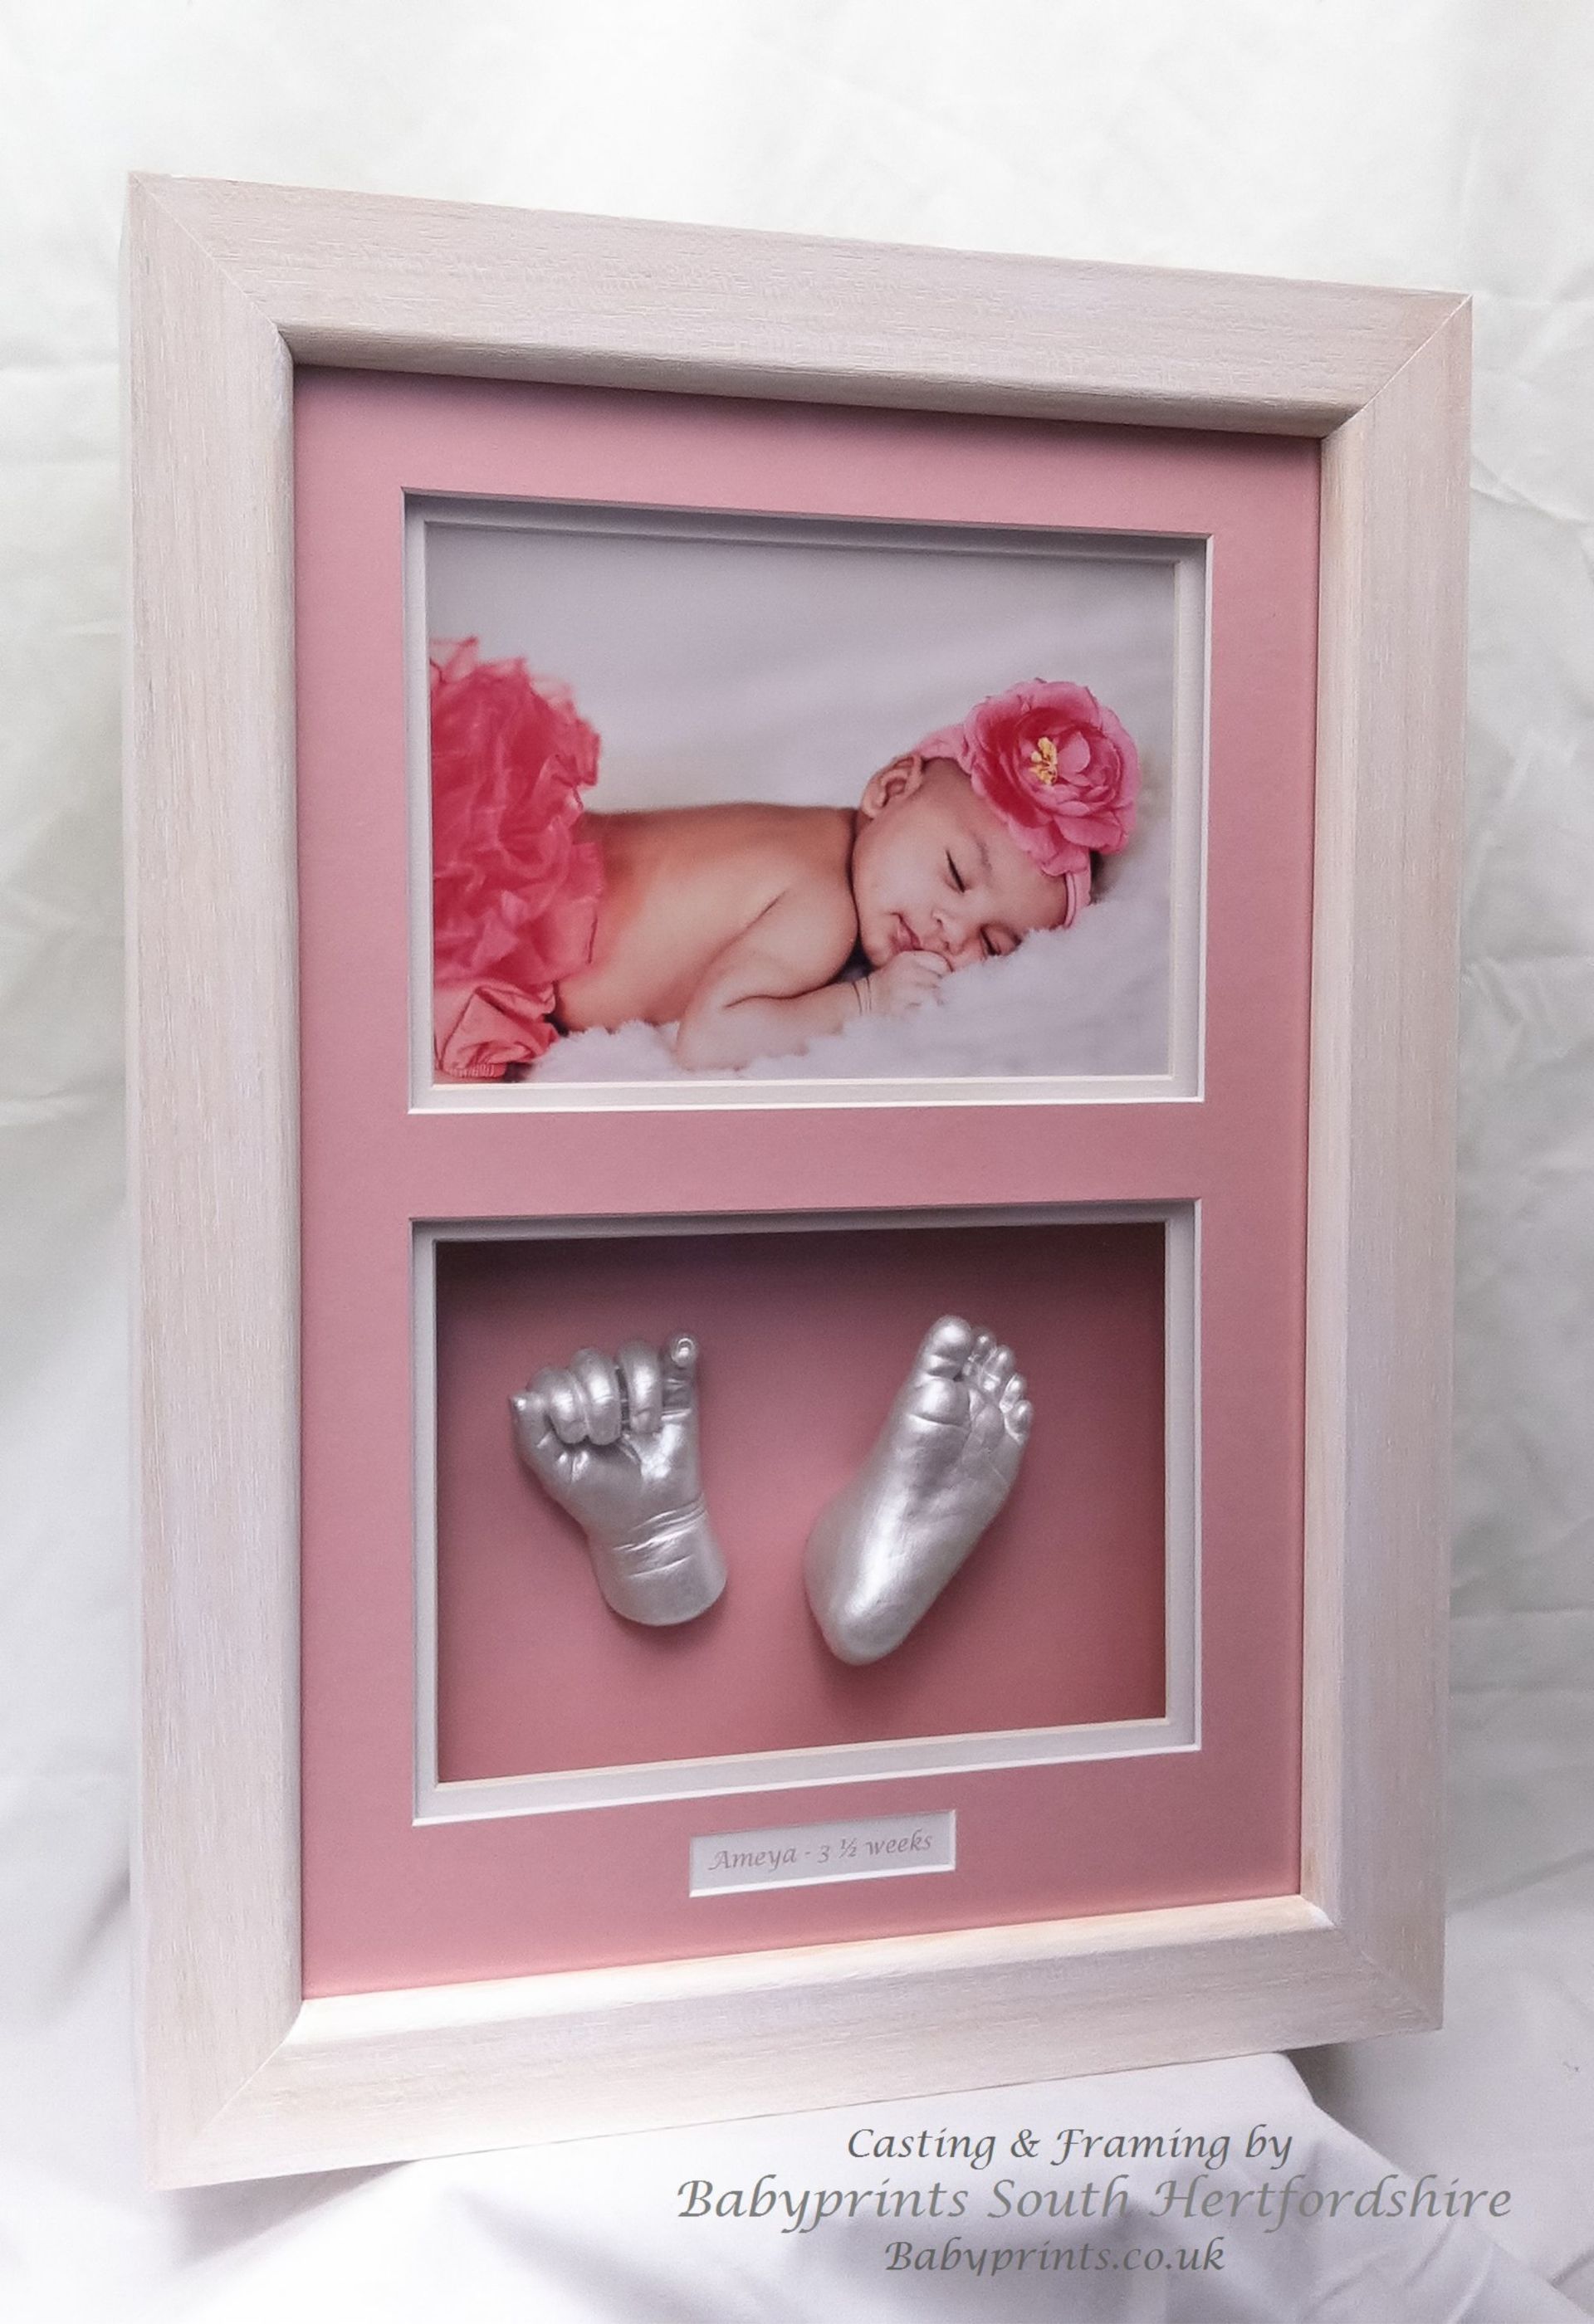 St Albans baby hand and foot casting gifts